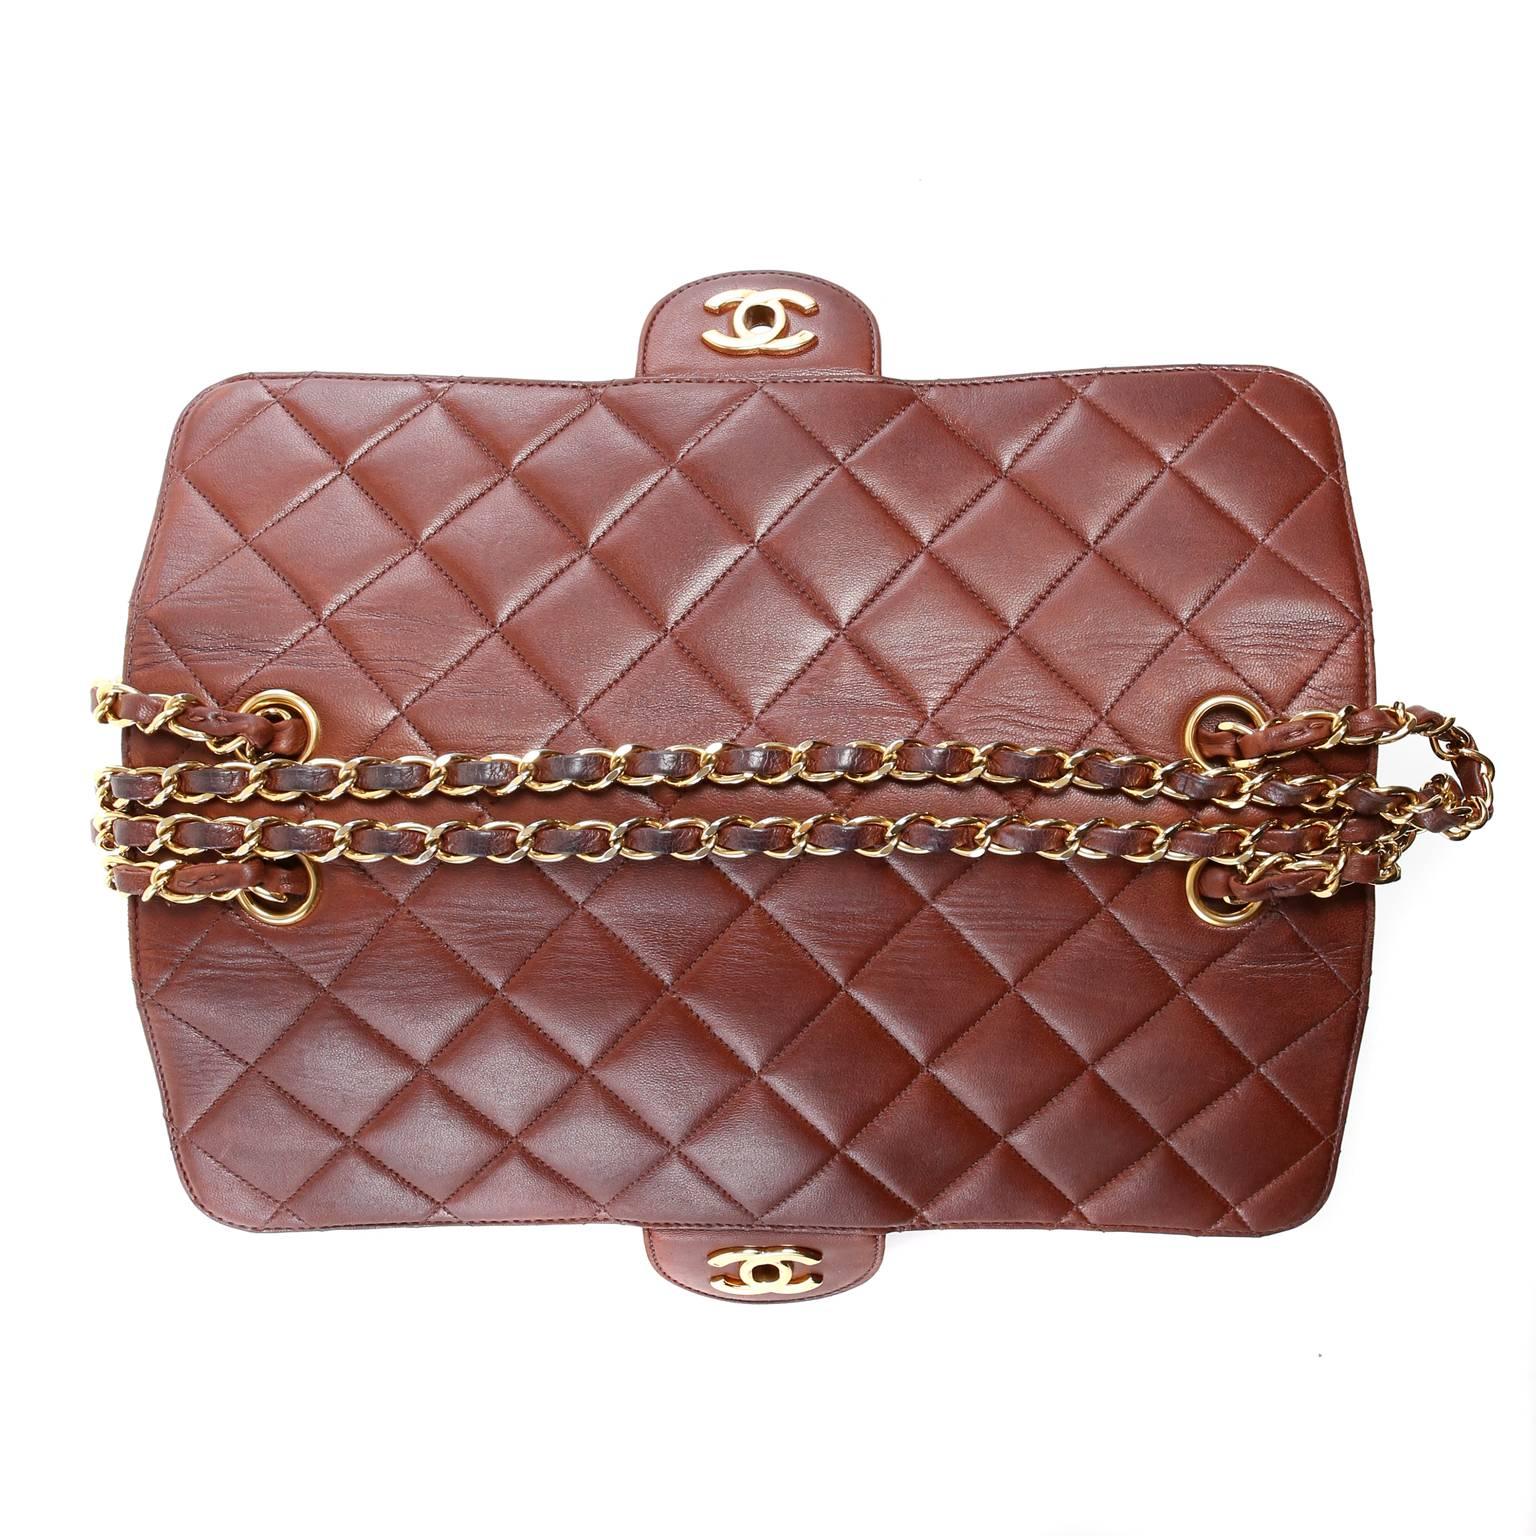 Chanel Brown Leather Double Sided Flap Bag- Gold Hardware 1